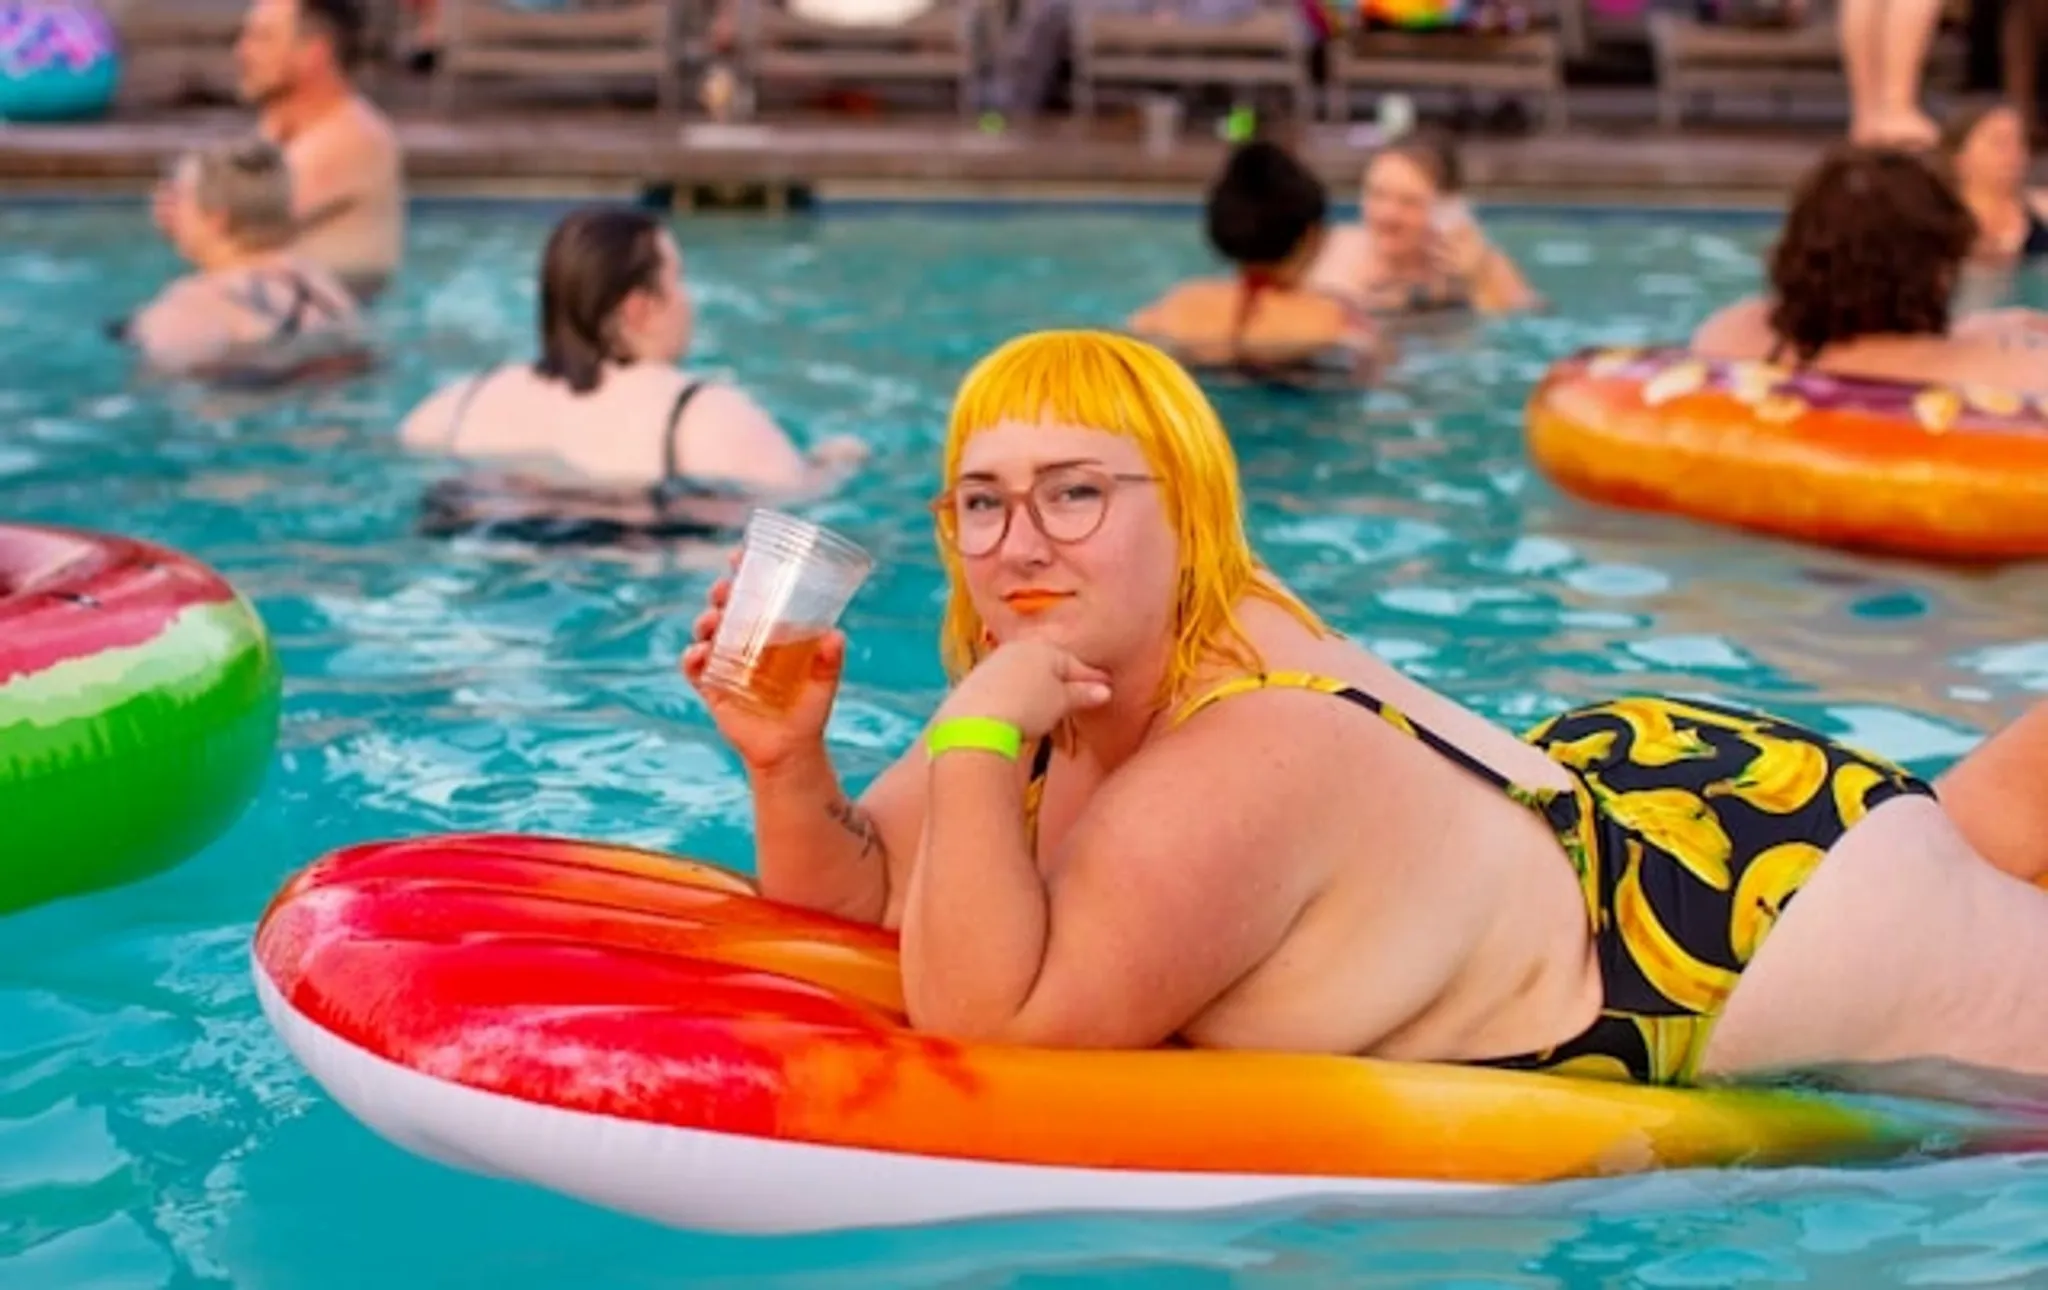 A plus-size woman in the pool